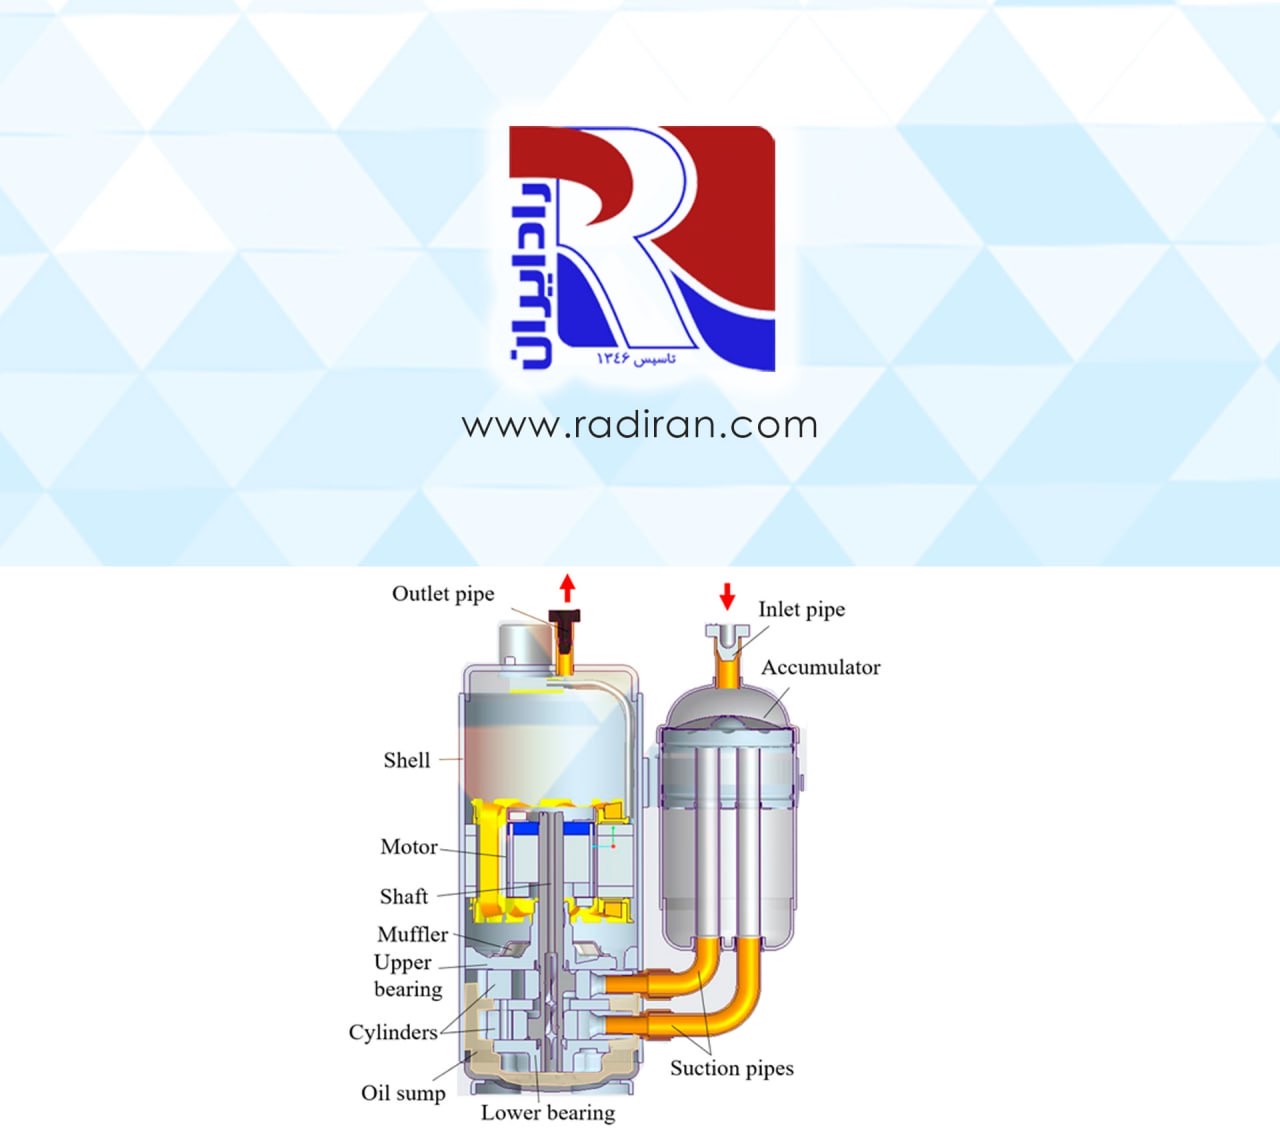 D:\ \New folder\1403\Radiran\Articles\20 - The Role of an Accumulator in the Refrigeration Cycle